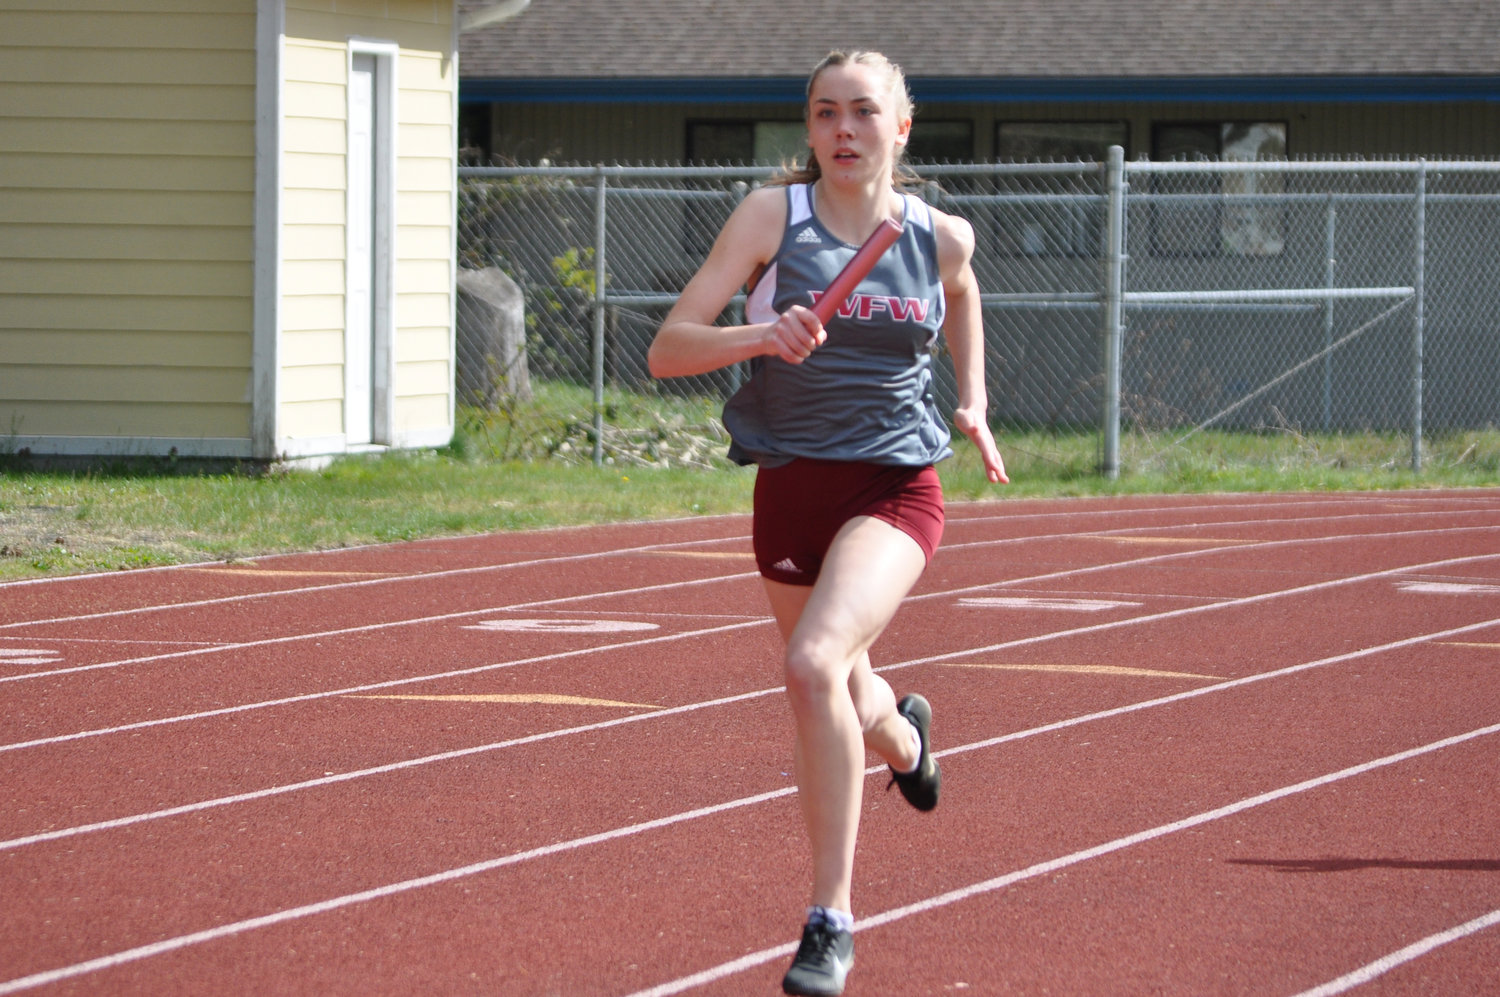 W.F. West's Brenna Witchey runs a leg in the girls 4x200-meter relay on Thursday at Shelton.